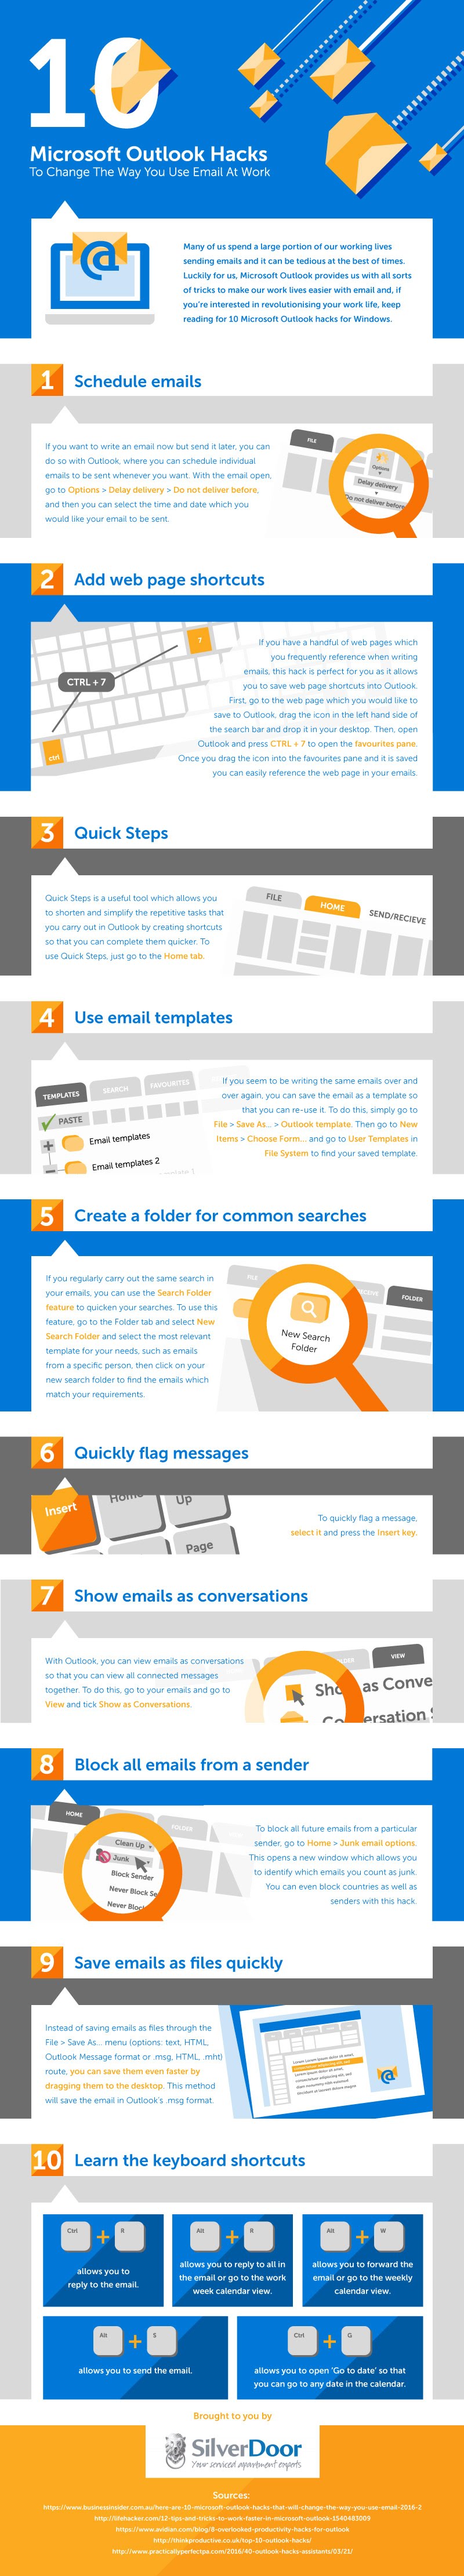 10 Microsoft Outlook Hacks To Change The Way You Use Email At Work #Infographic